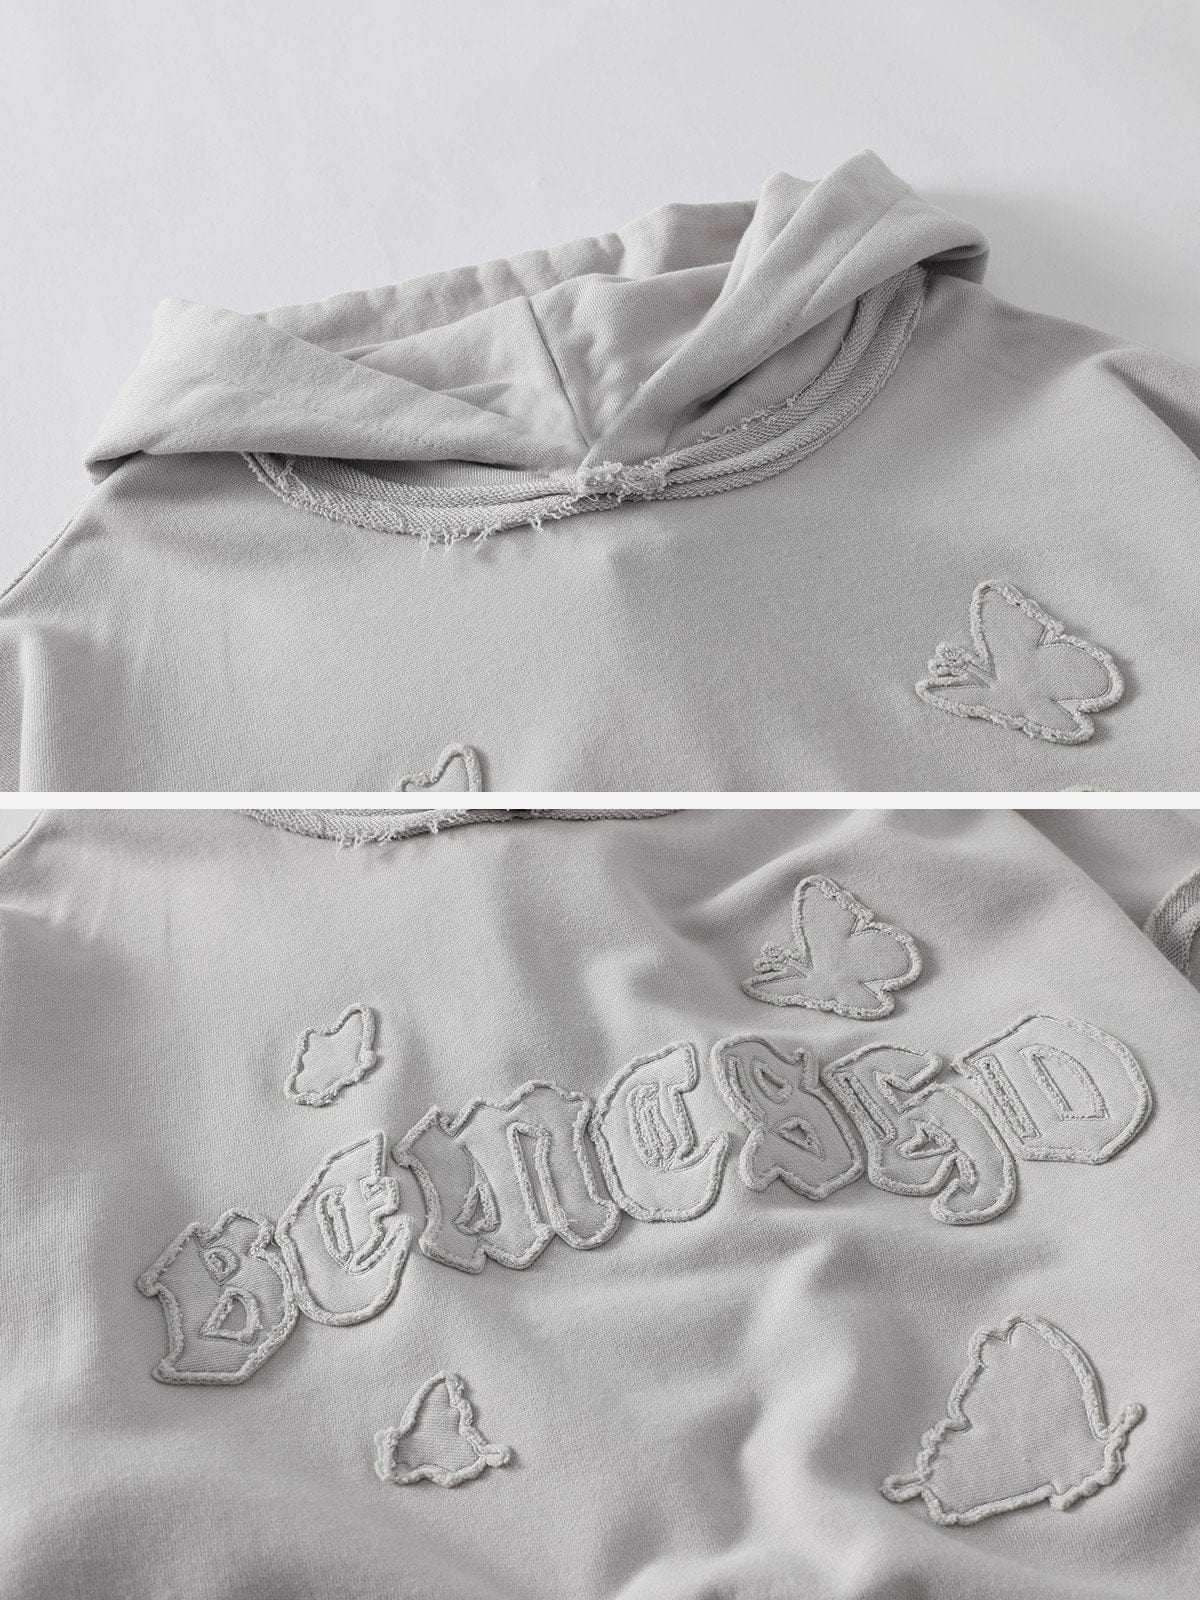 NEV Distressed Applique Embroidery Hoodie